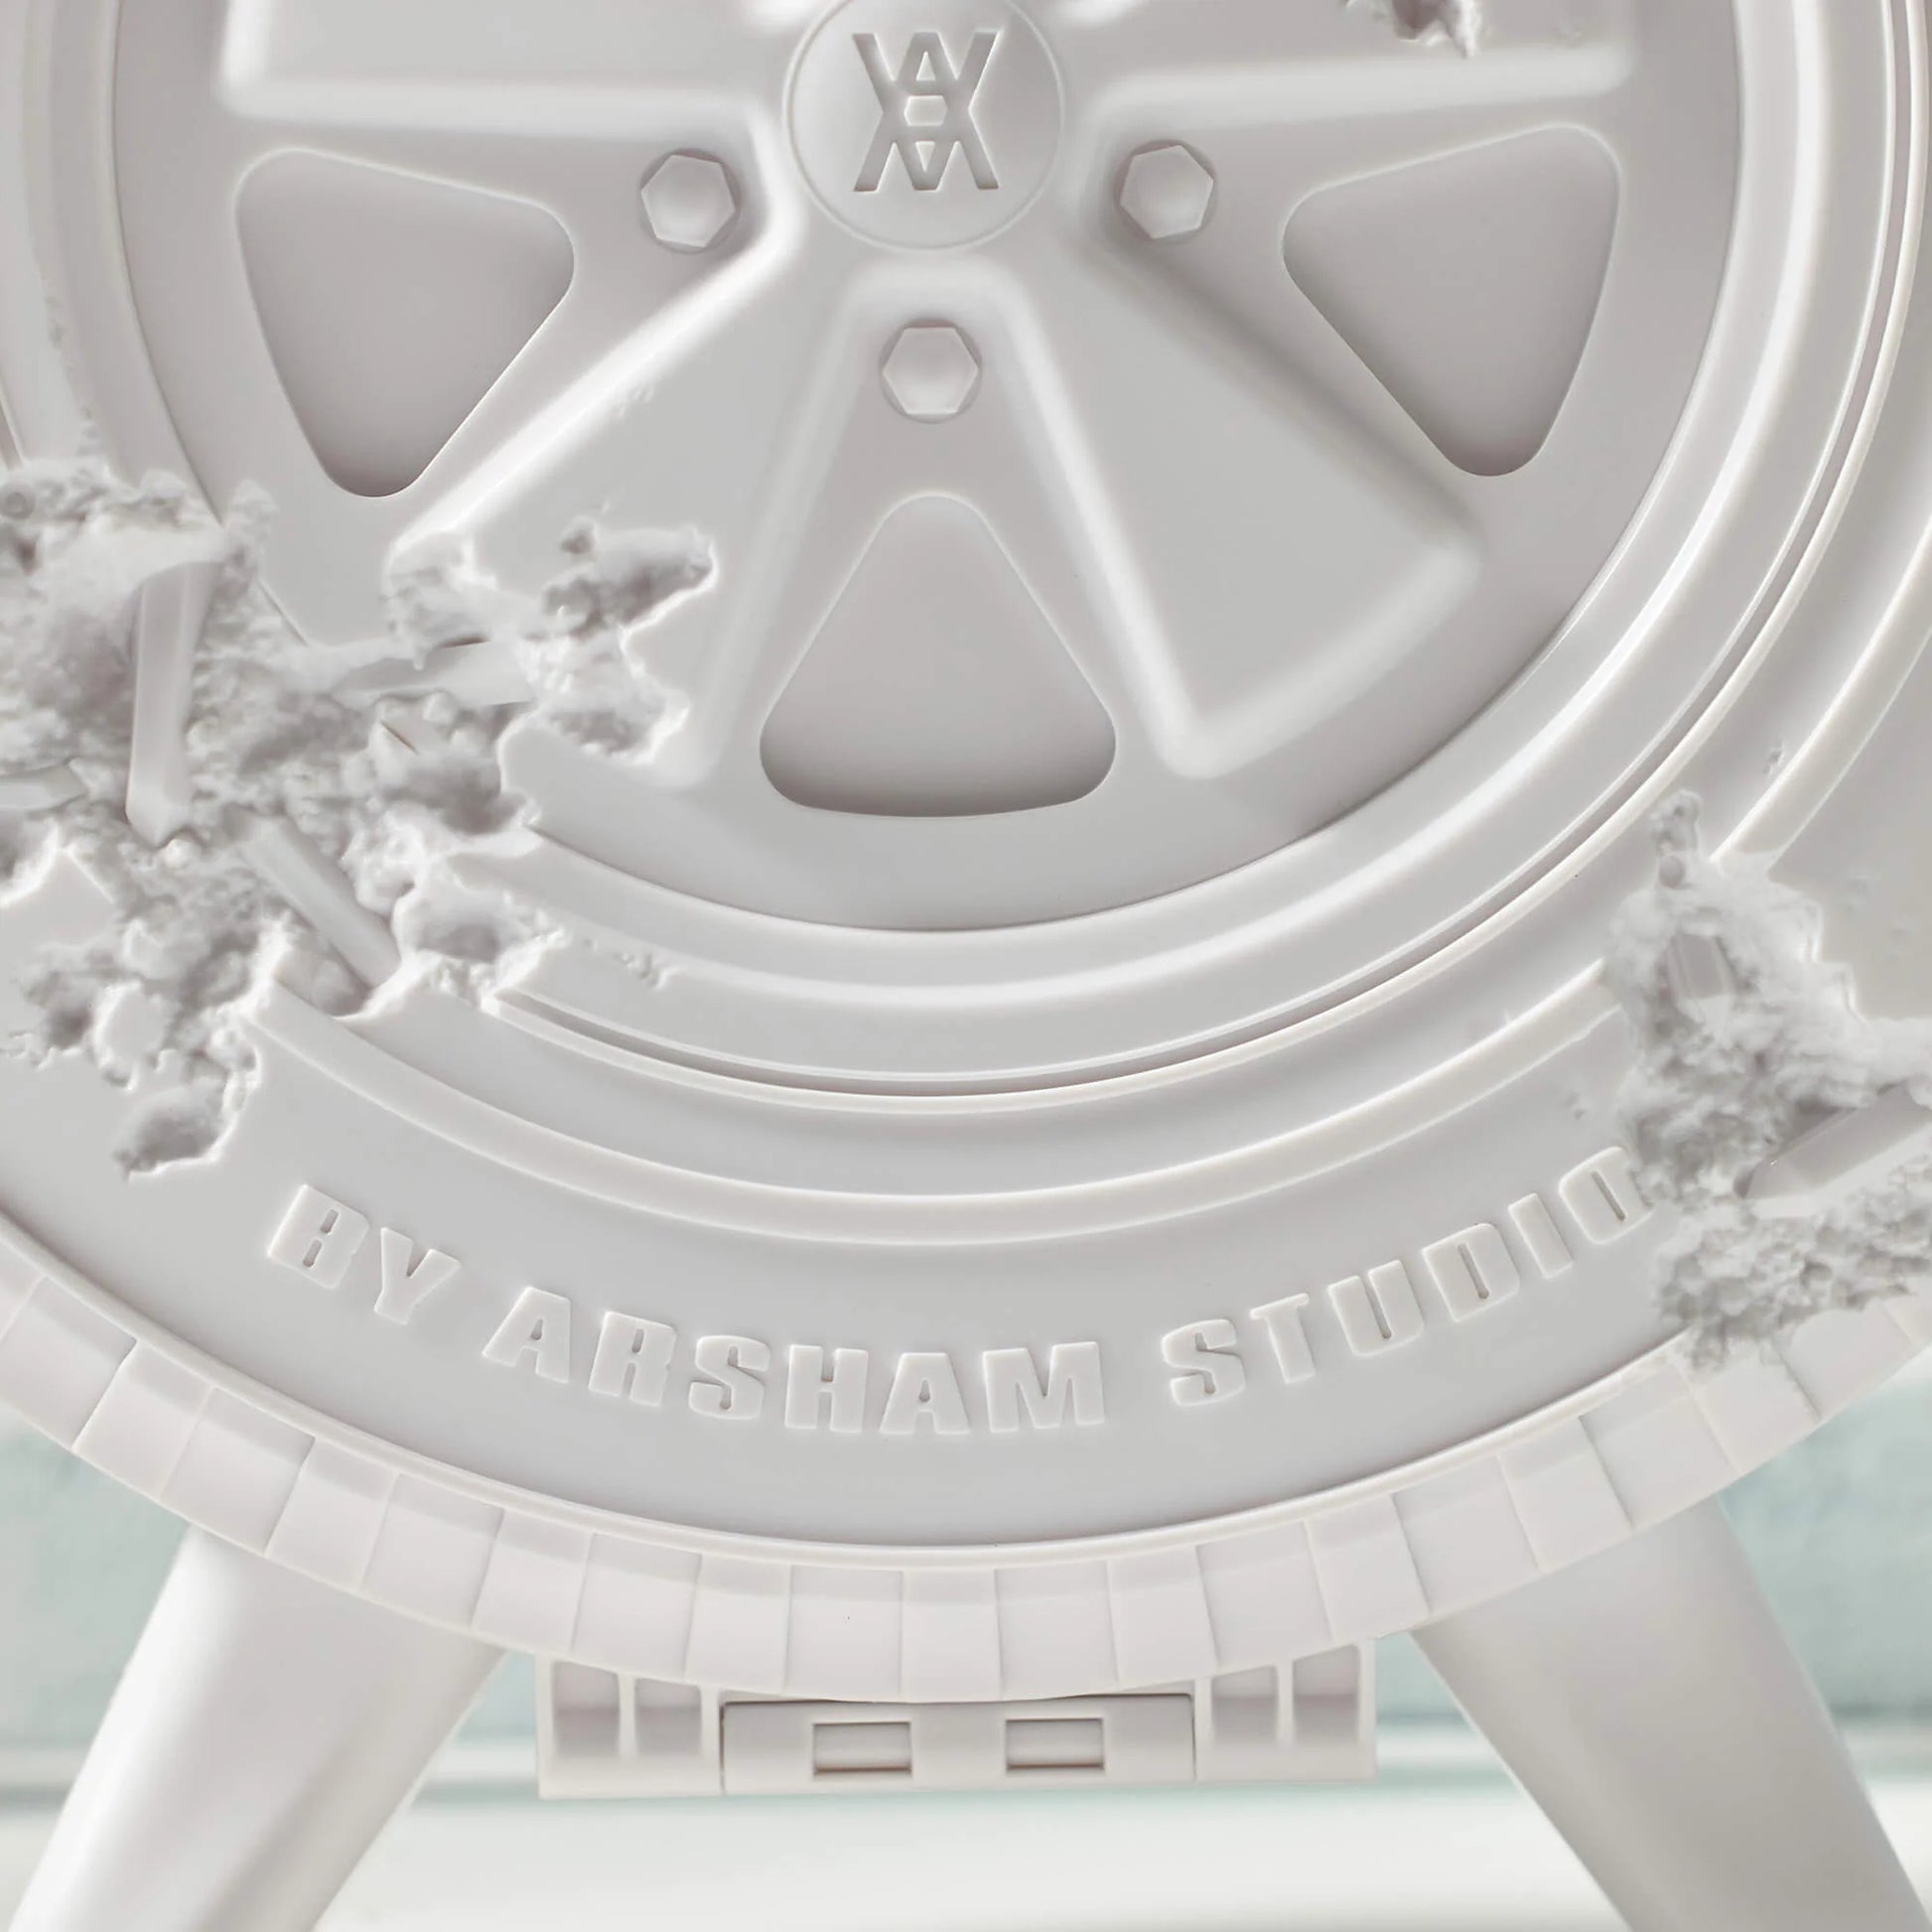 Daniel Arsham x Hot Wheels Eroded Porsche 930 and Eroded Rally Case, 2023 Edition of 20,000